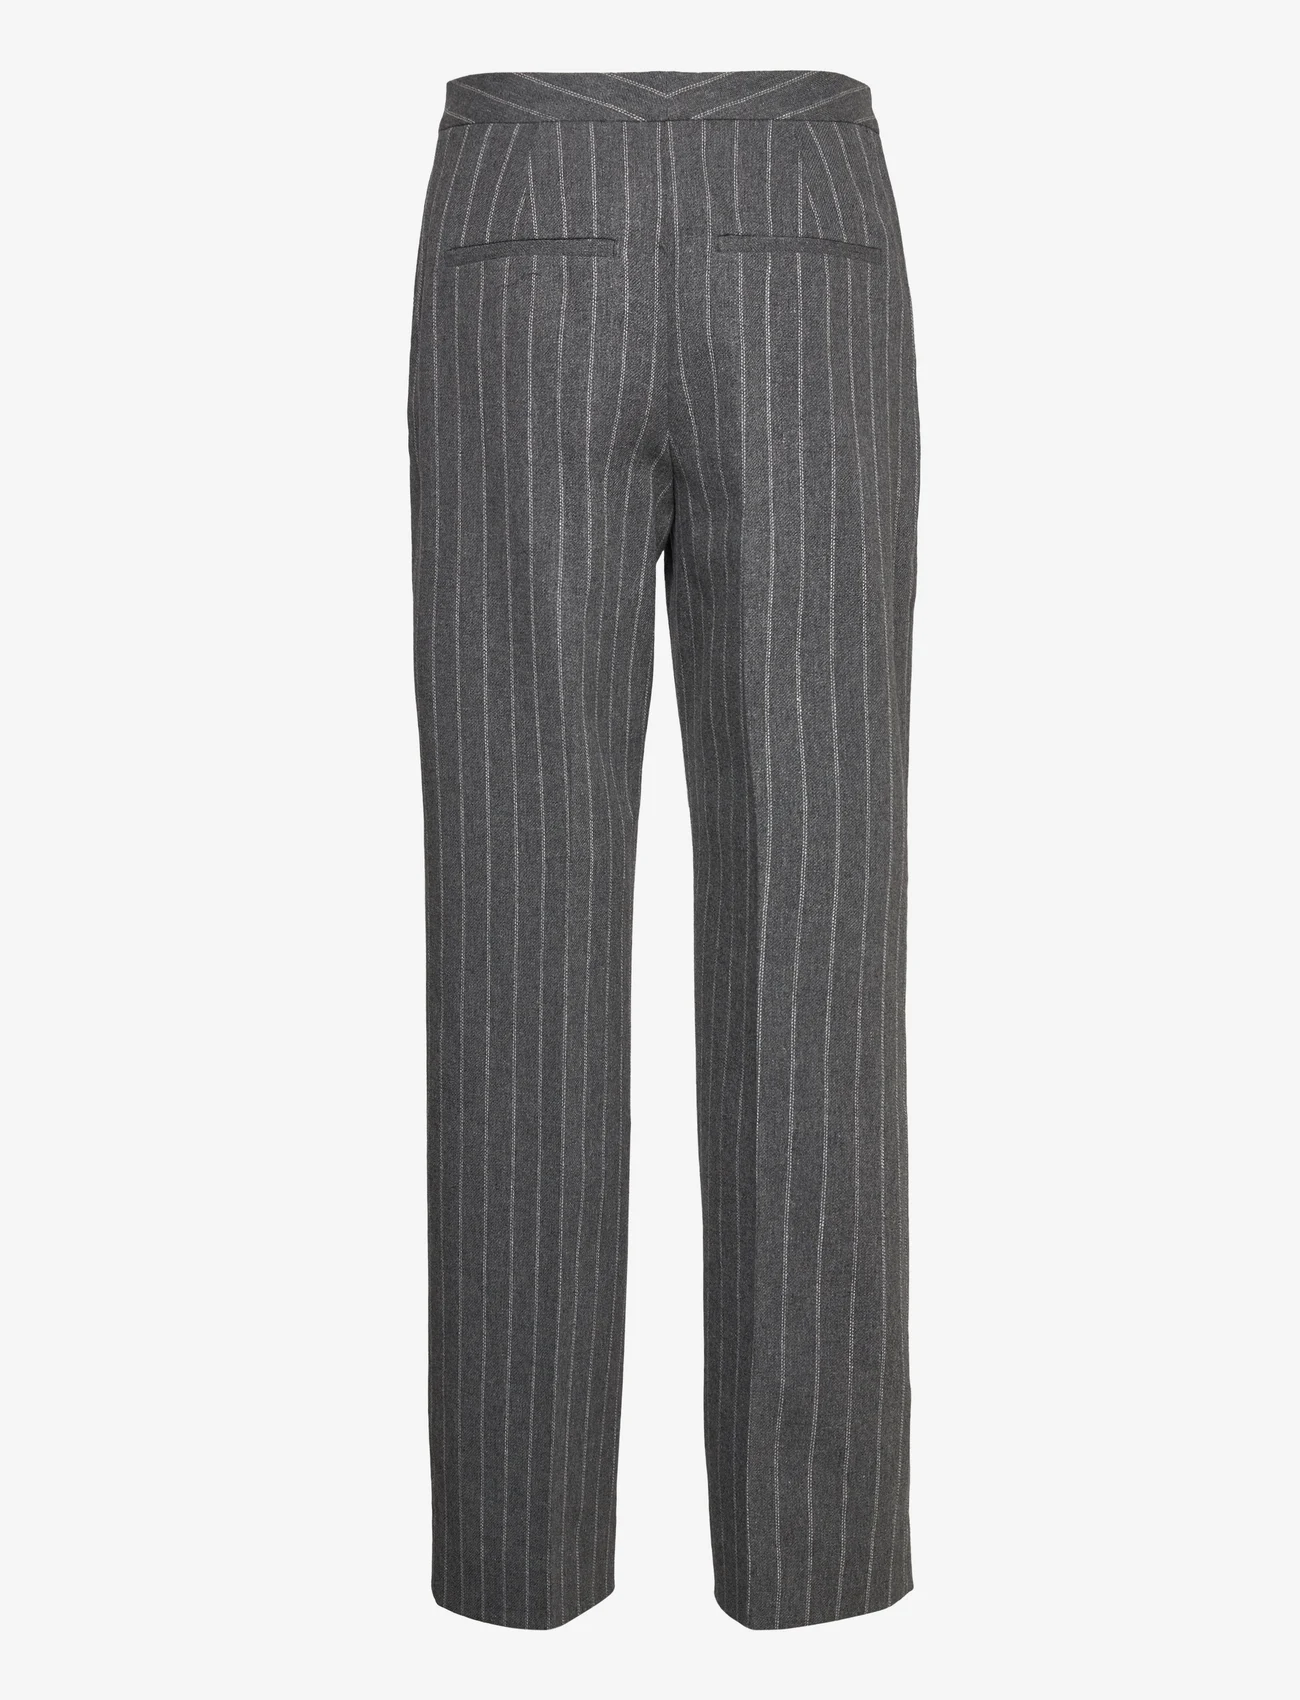 Wood Wood - Willow wool trousers - bukser med lige ben - charcoal - 1